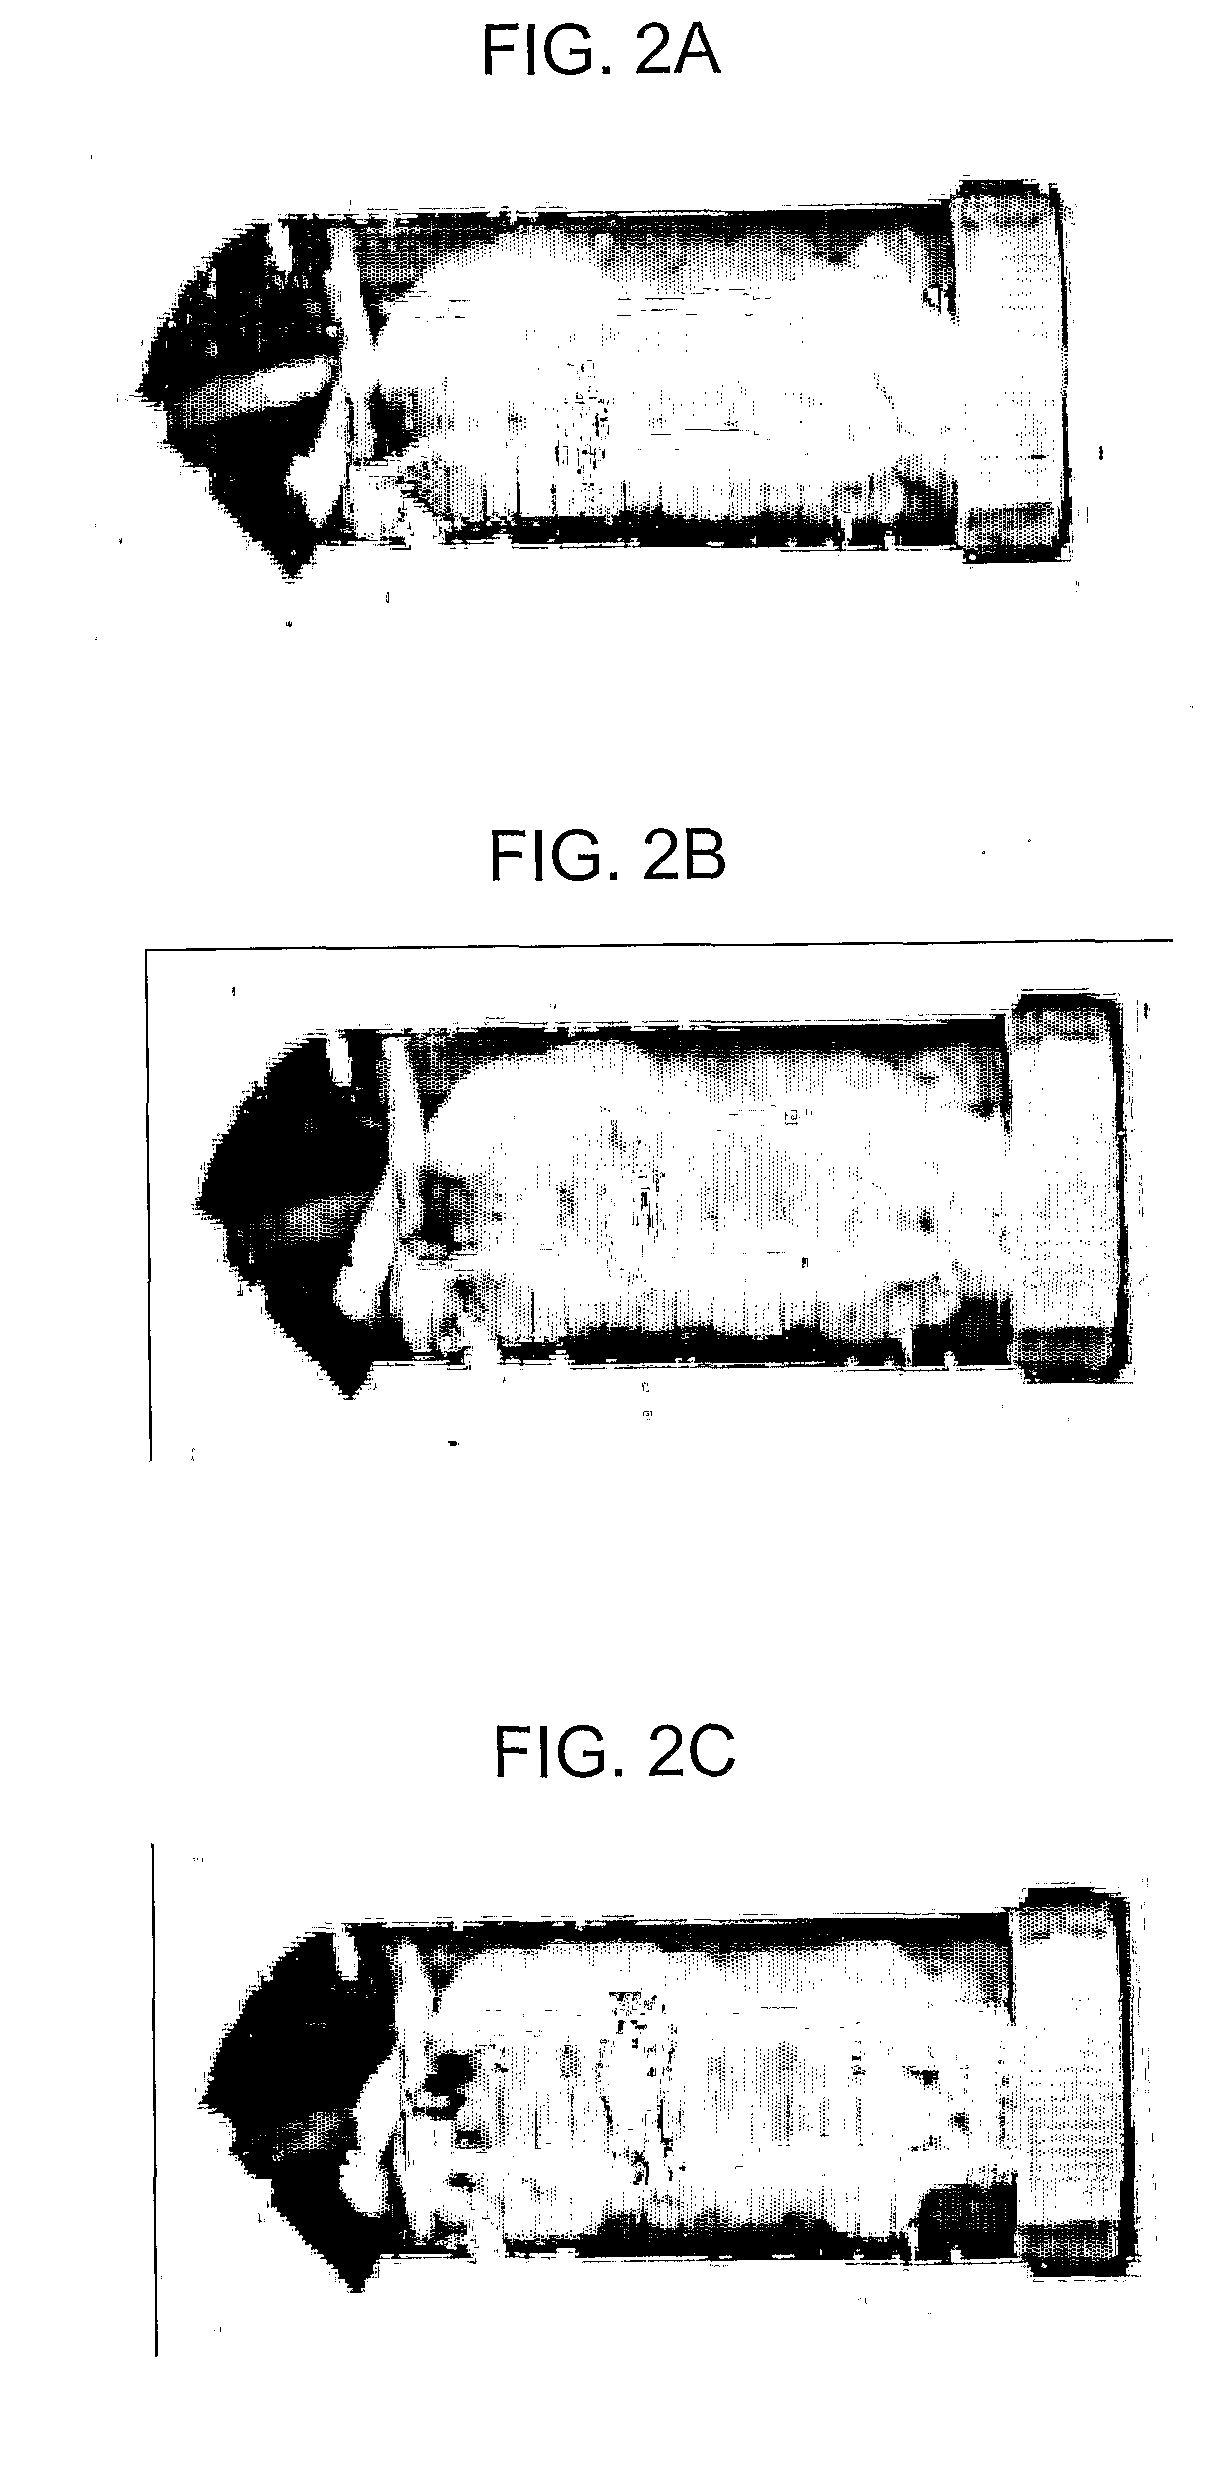 System and Methods for Generating Three-Dimensional Images From Two-Dimensional Bioluminescence Images and Visualizing Tumor Shapes and Locations